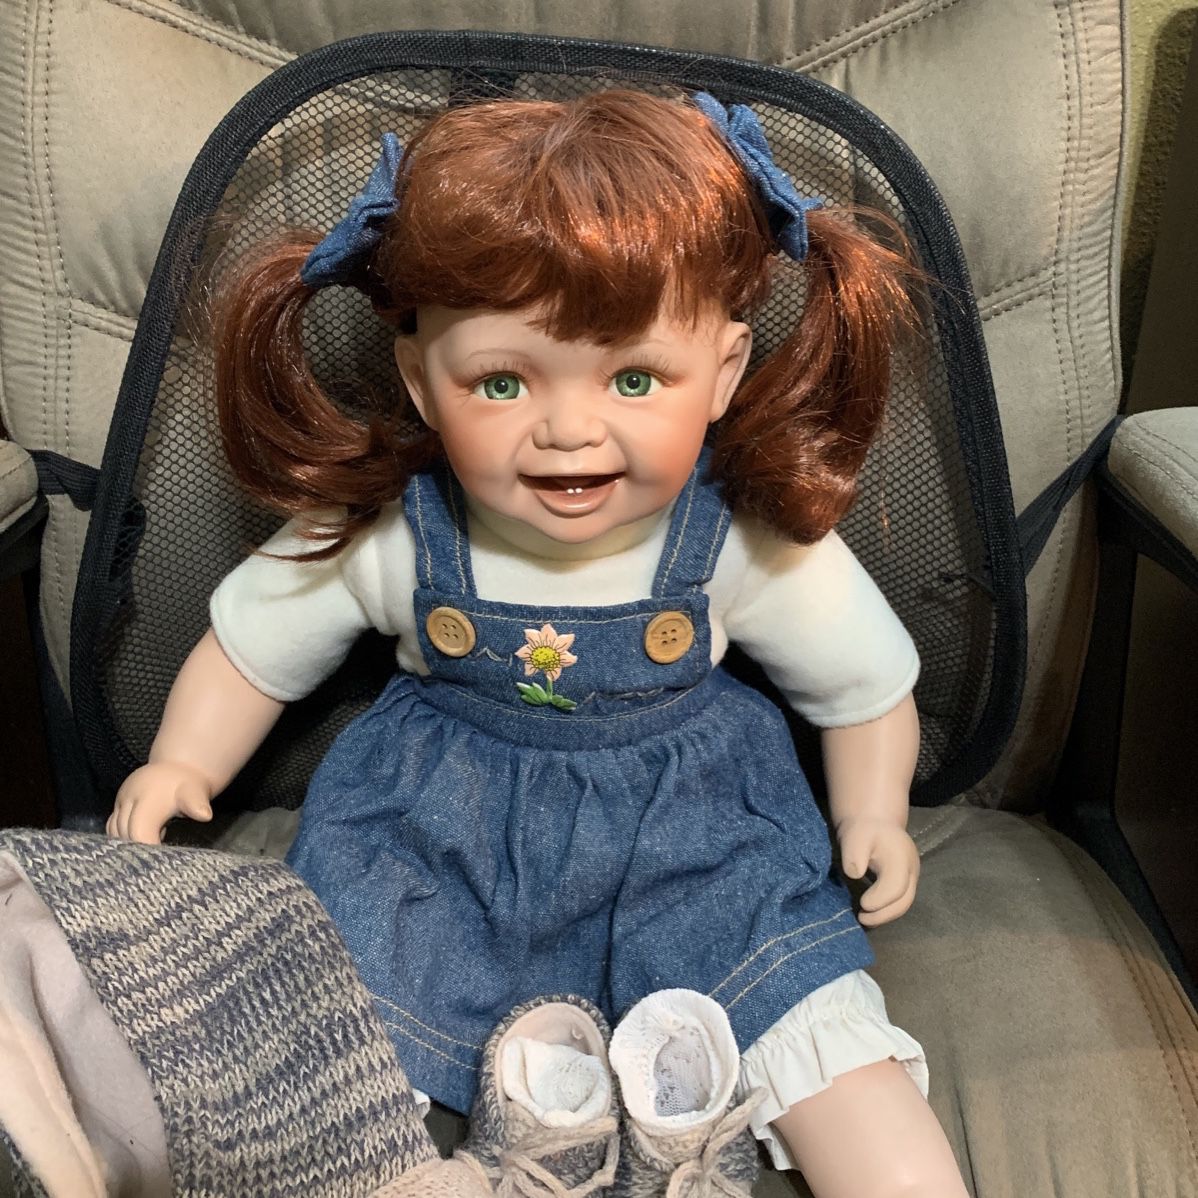 Porcelain Realistic Toddler Doll, Original Price  $75, Selling For $45. 